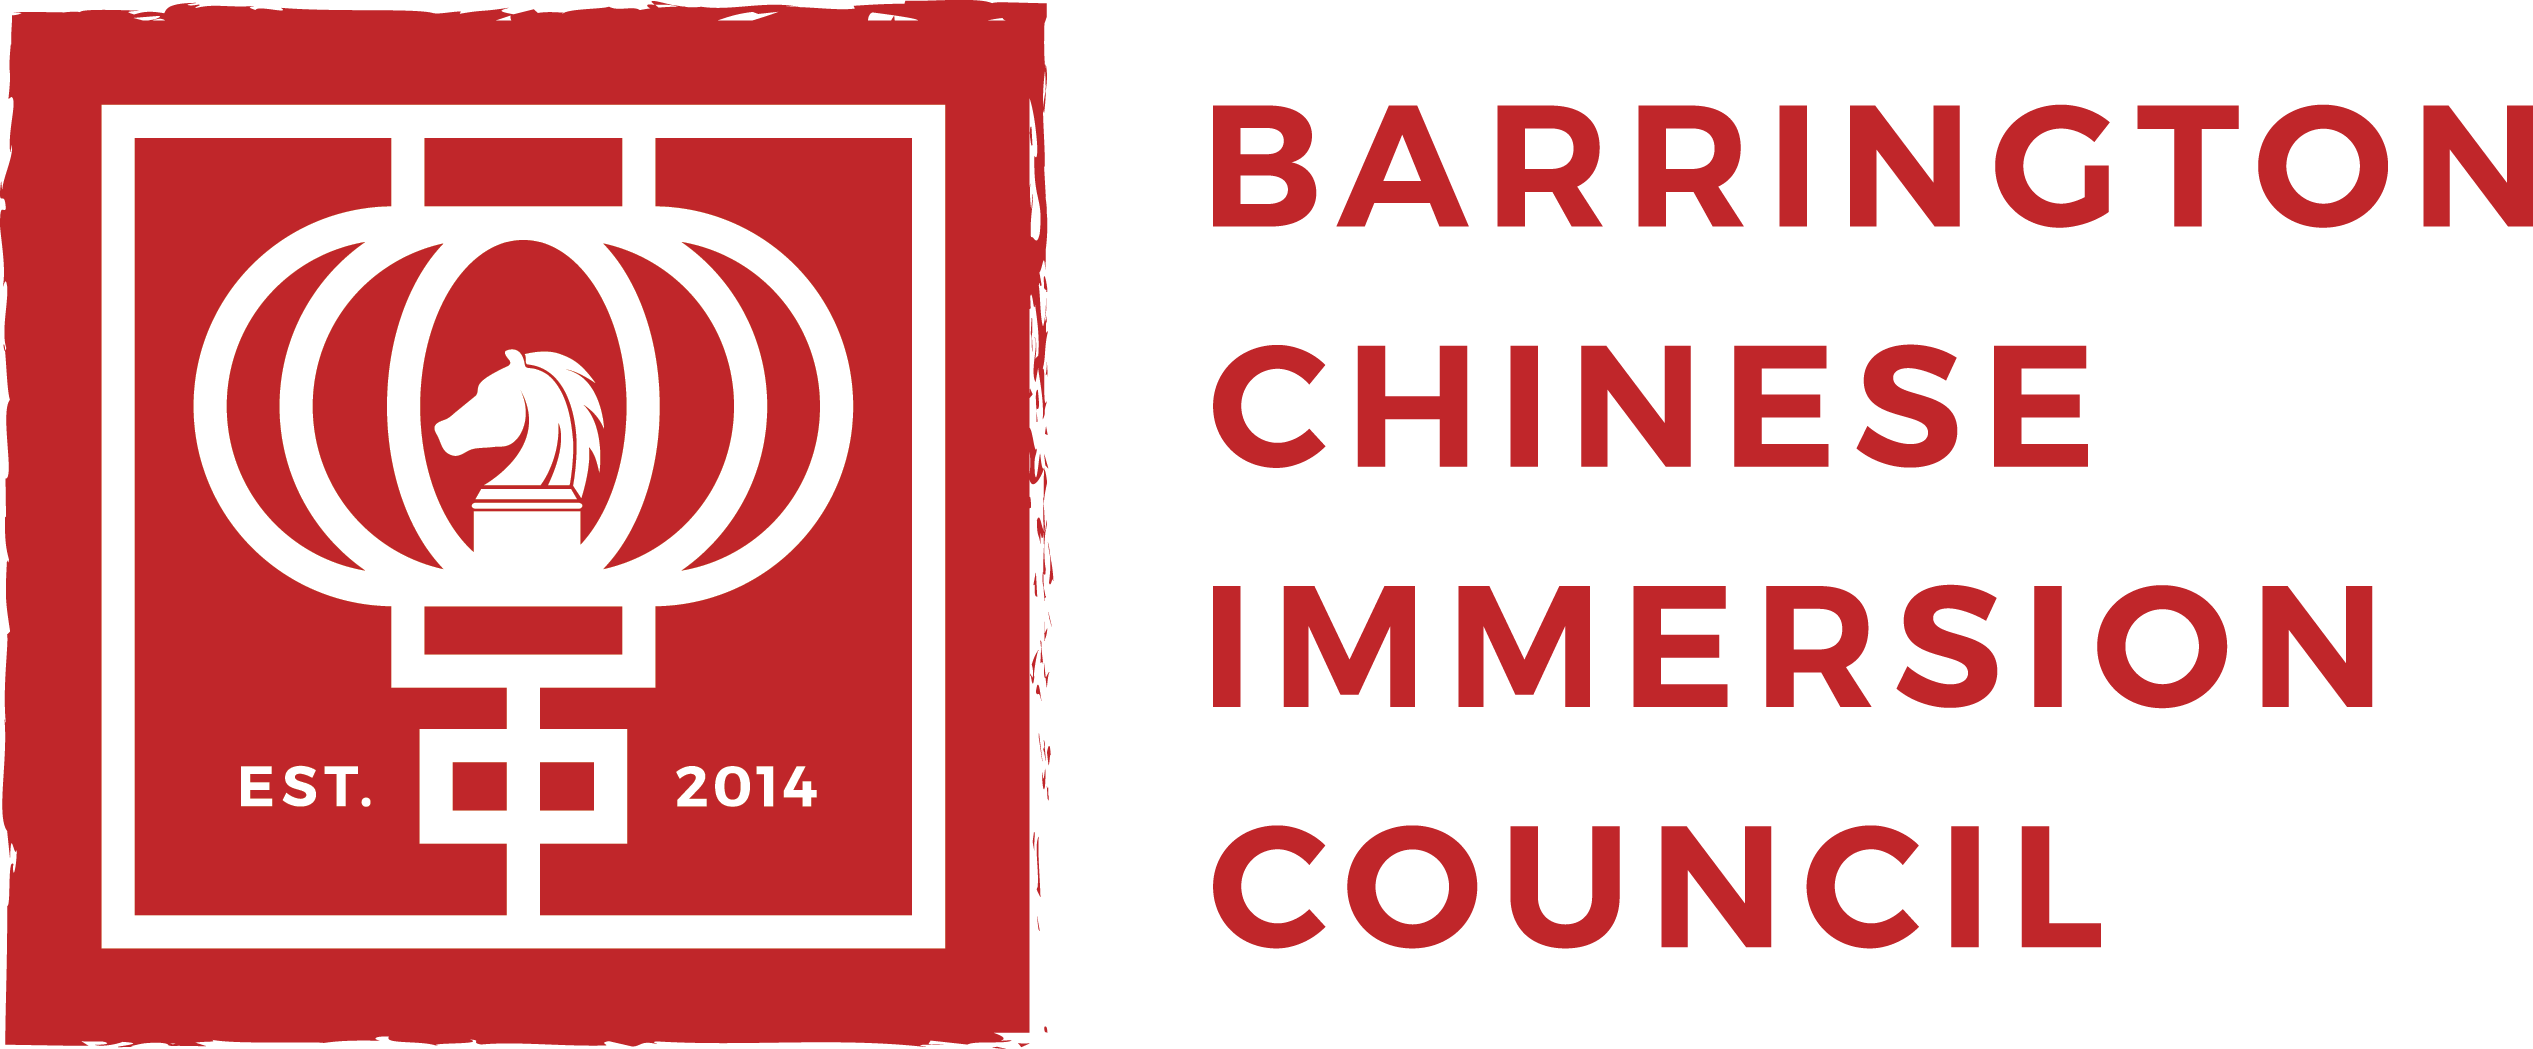 Barrington Chinese Immersion Council